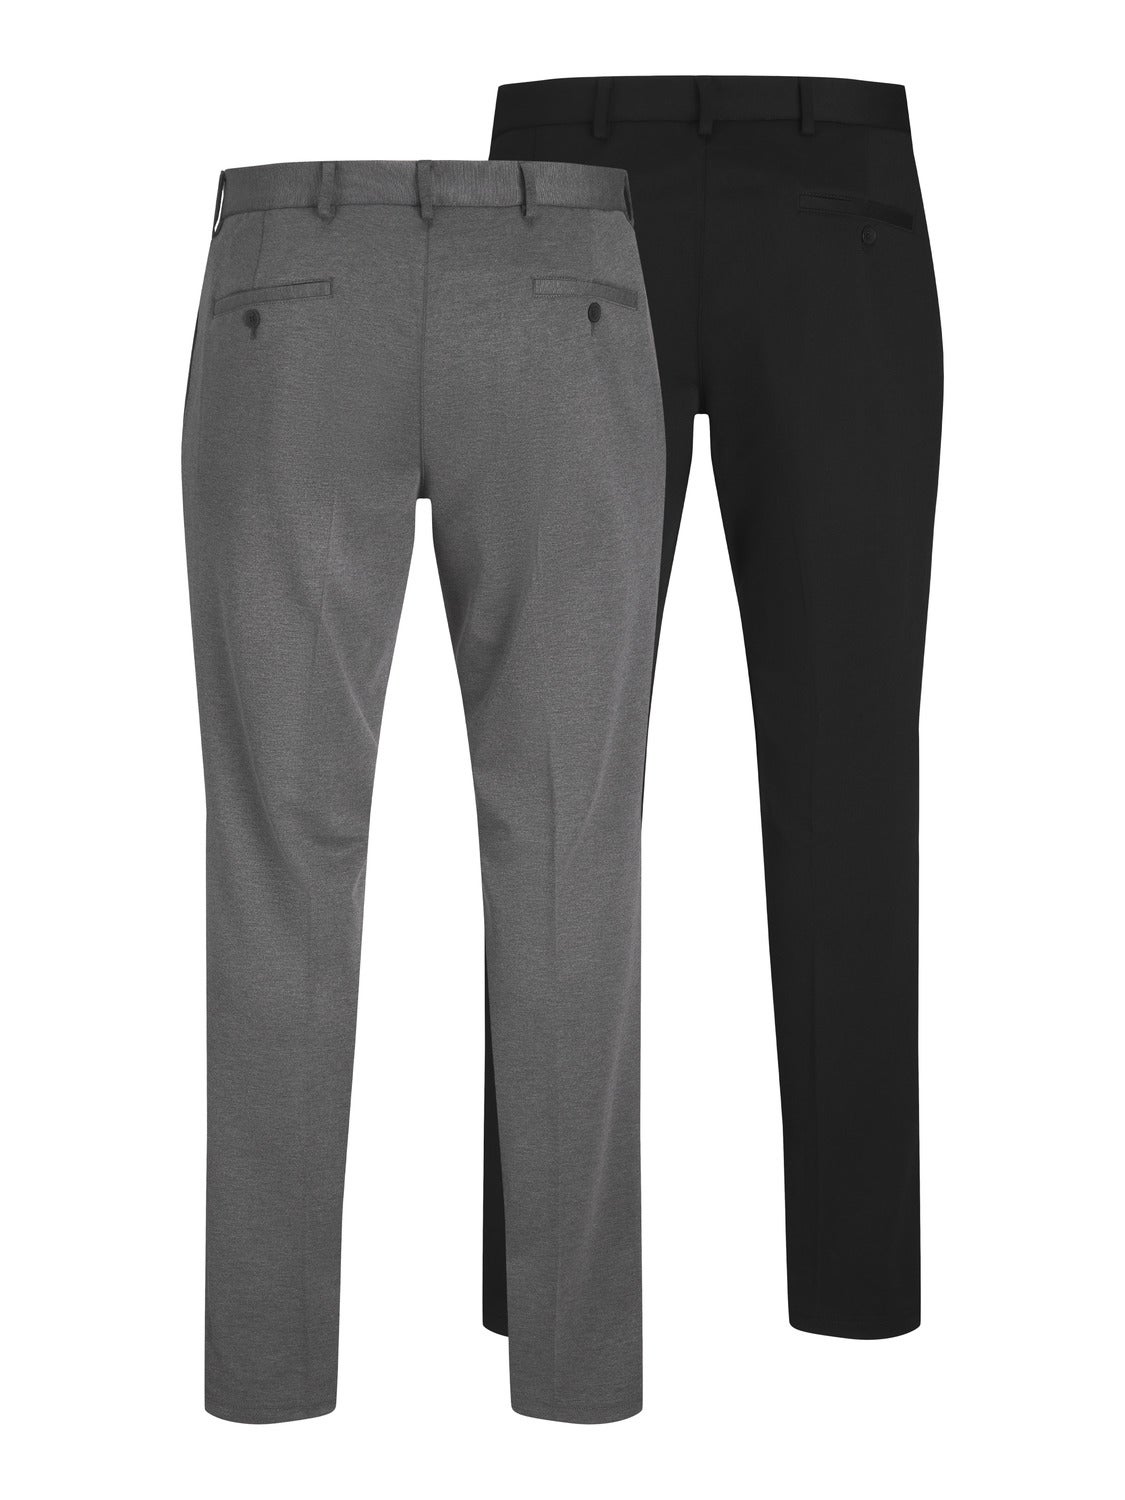 Casual Mens Male Slim Fit Business Office Pants Skinny Stretch Formal  Trousers | eBay